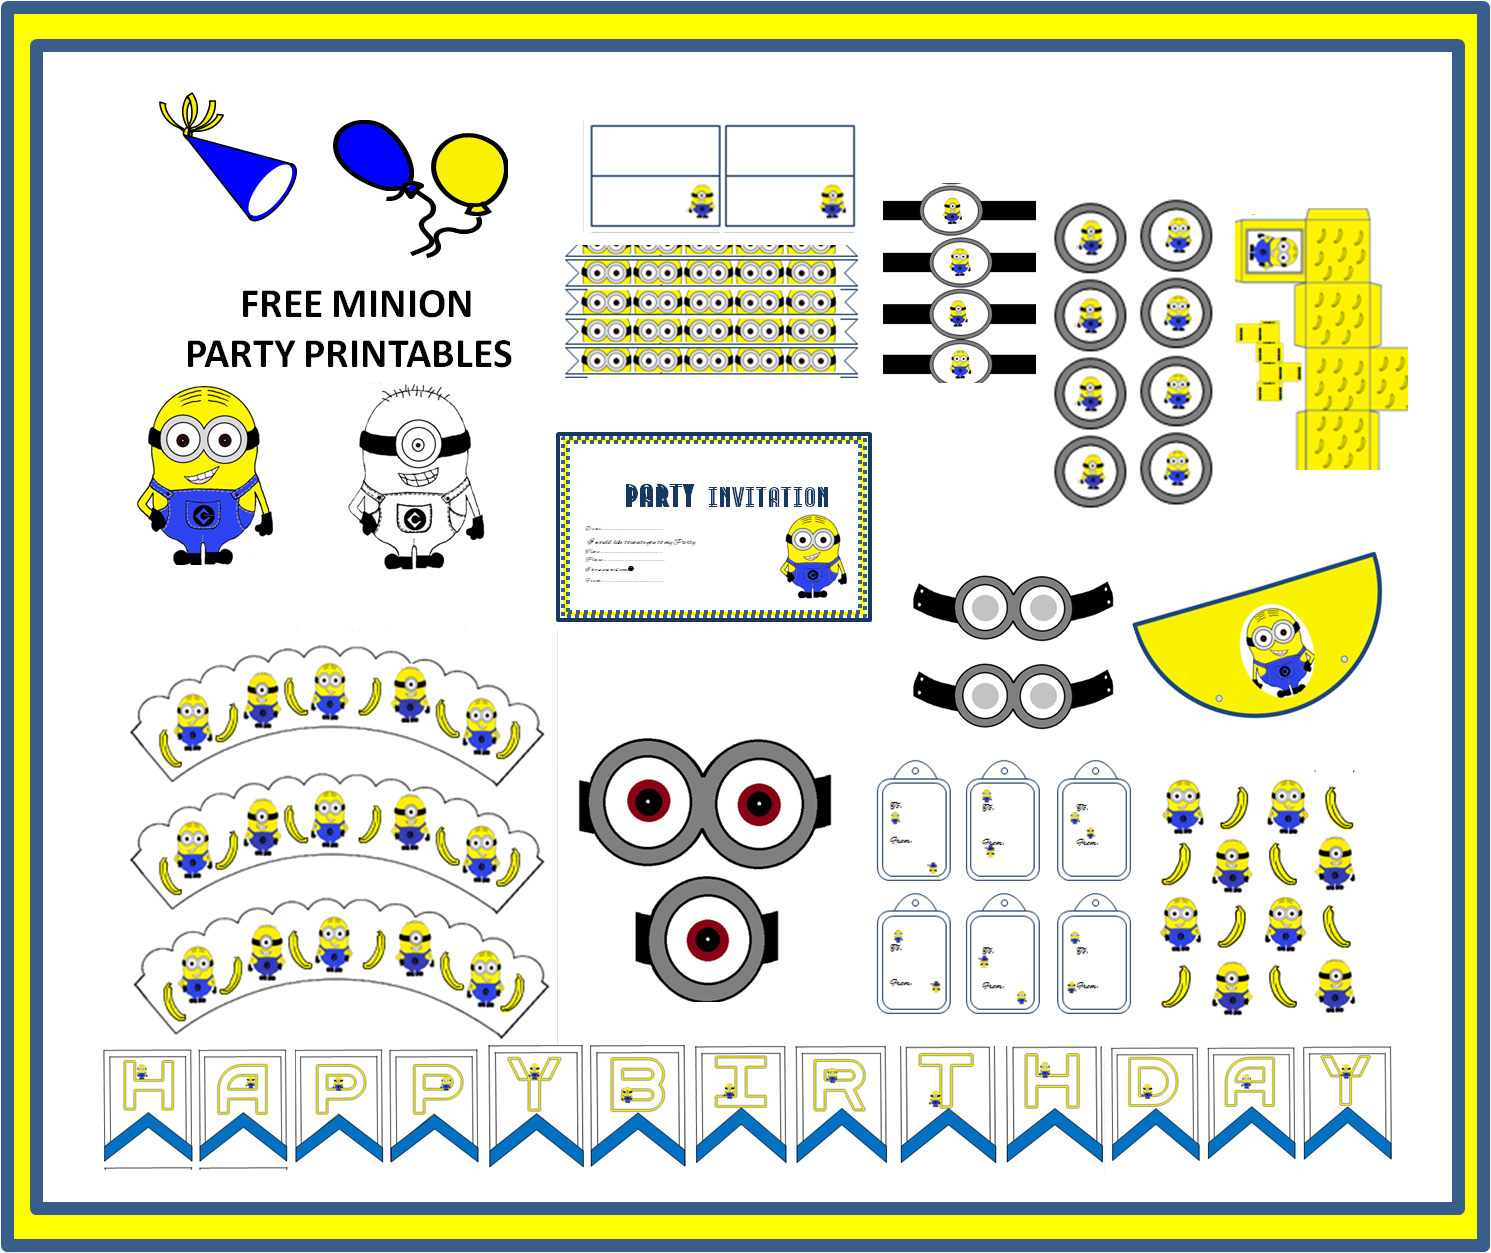 The Art Bug Free Minion Themed Party Printables